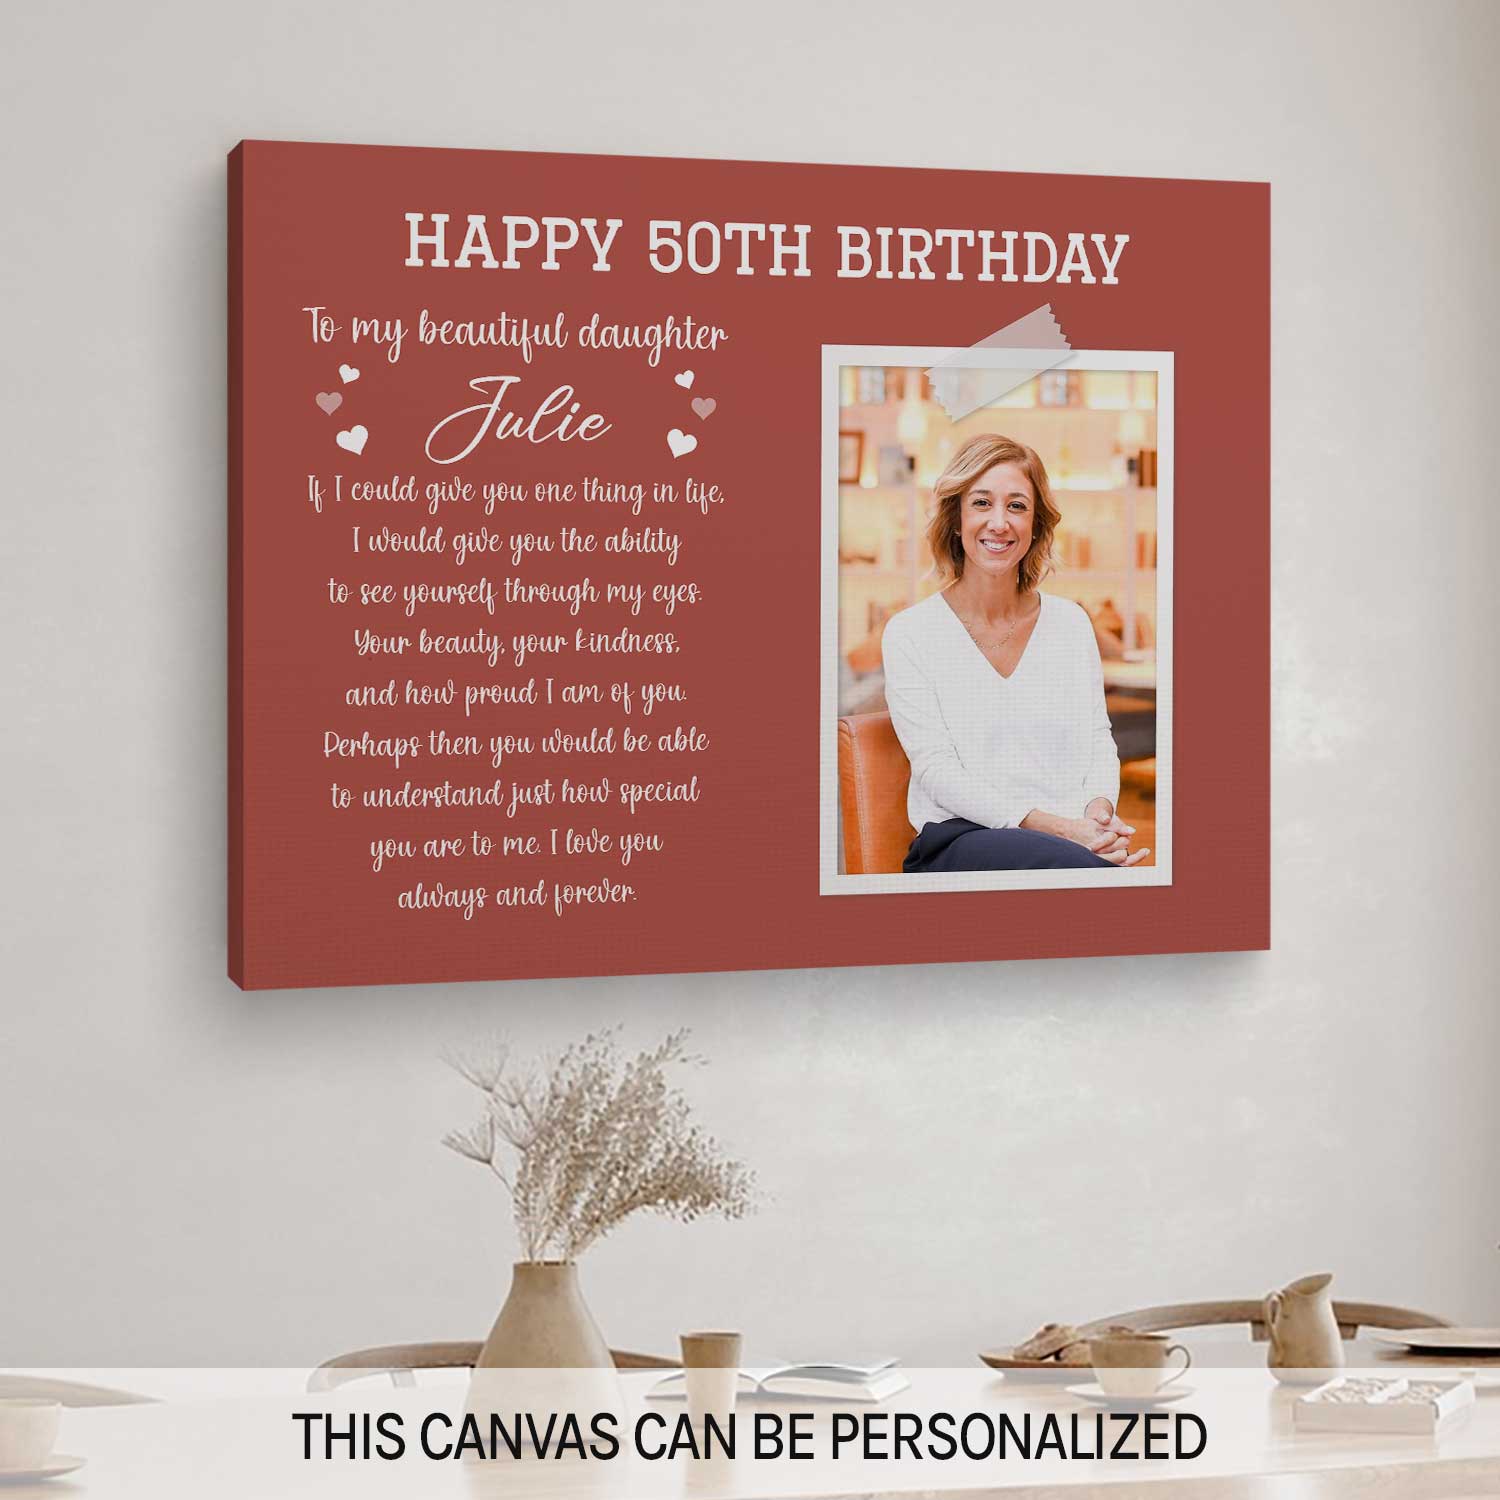 Happy 50th Birthday - Personalized 50th Birthday gift For Daughter - Custom Canvas Print - MyMindfulGifts